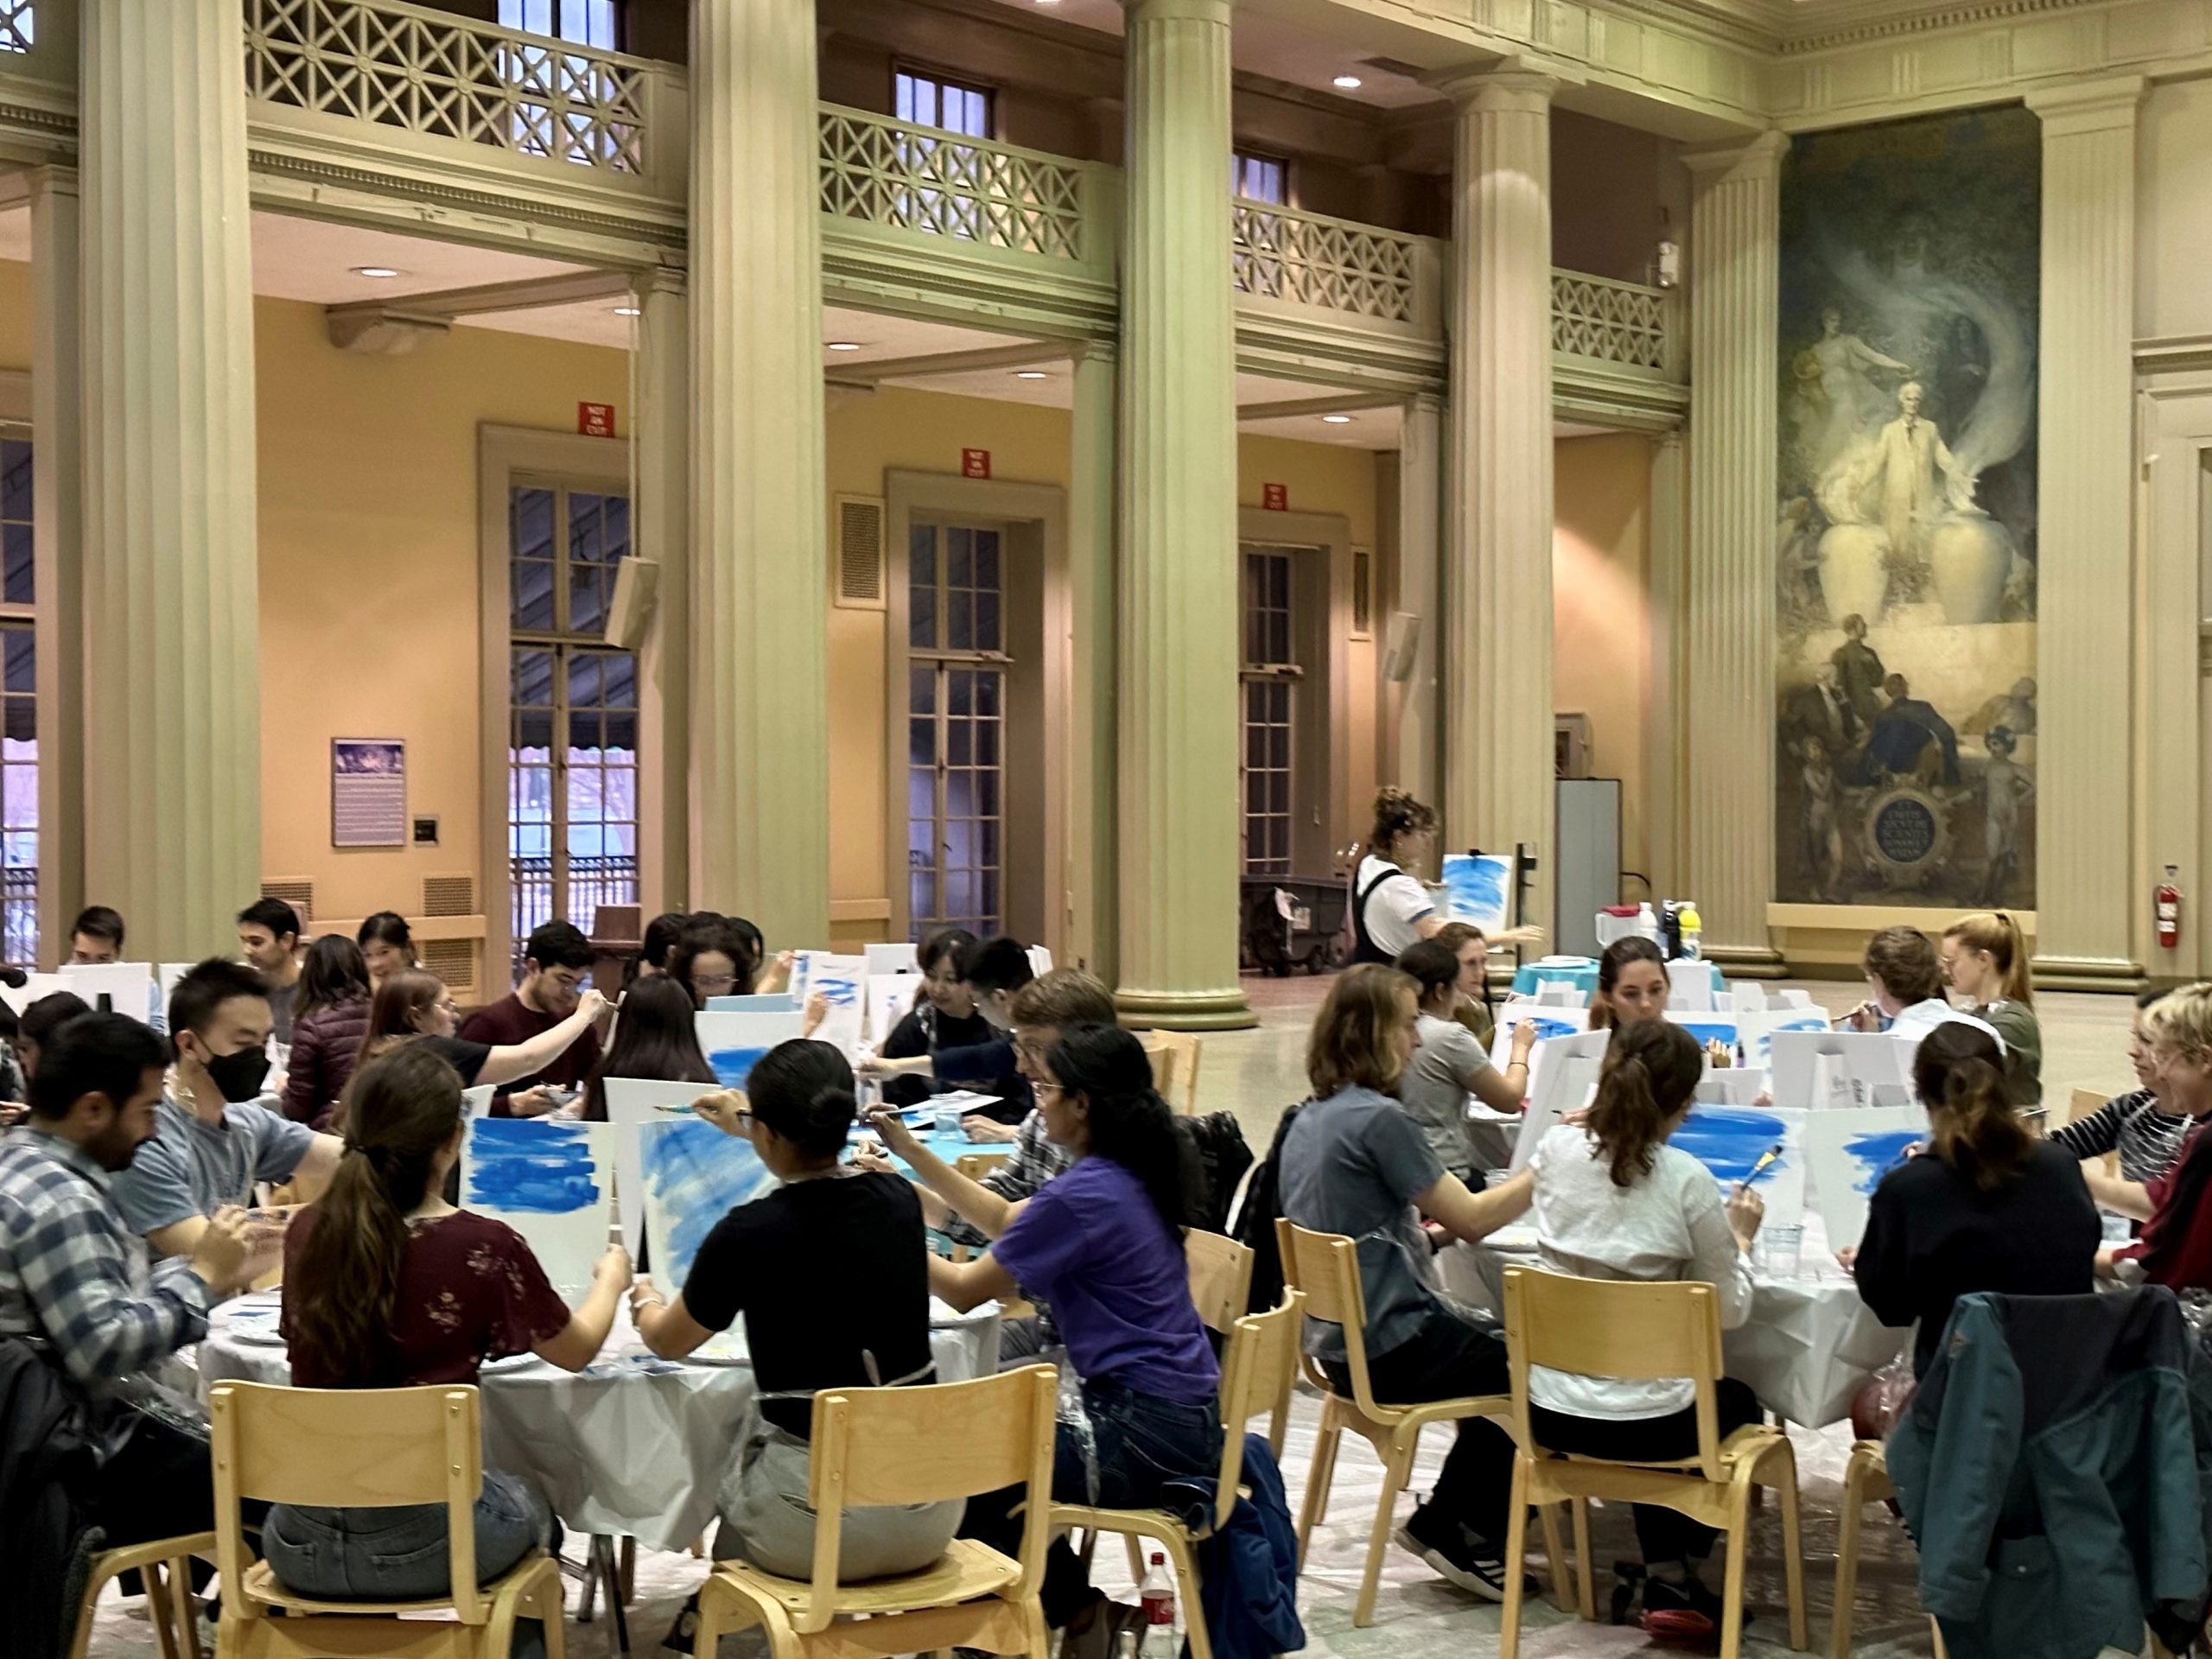 A group of students at round tables paint along with an artist at the front of the room. They're in Morss Hall, a room with beautiful columns and murals on campus.